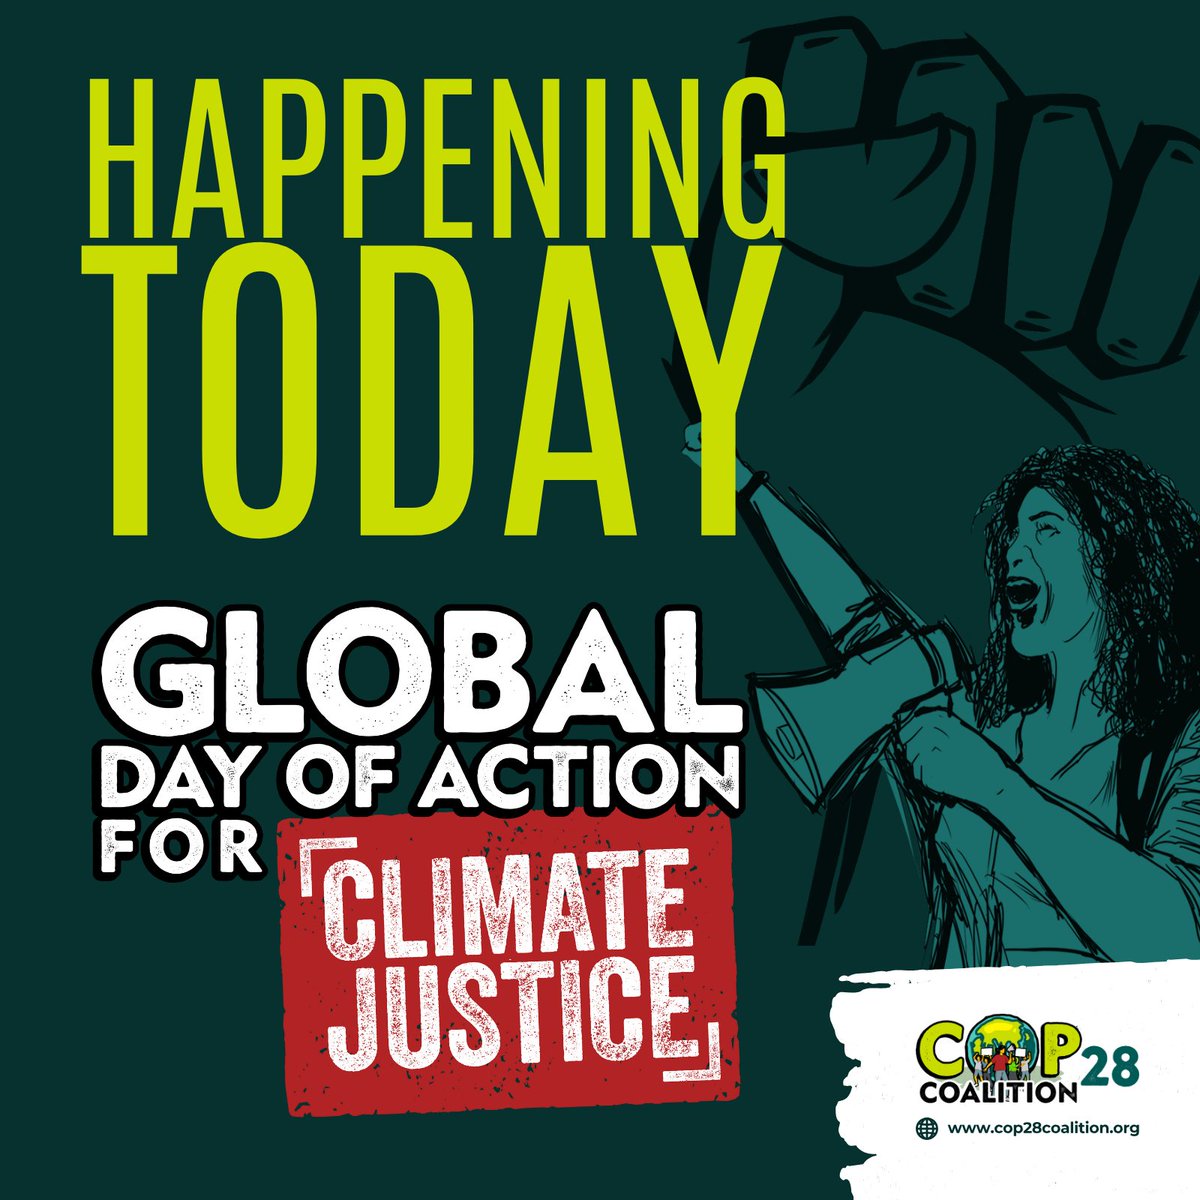 #Fight4ClimateJustice #SystemsChange

#NowWeRise – Bournemouth COP28 Day of Action - is happening today!

Join us from 11am at Bournemouth Pier Approach for a march and rally to demand climate justice